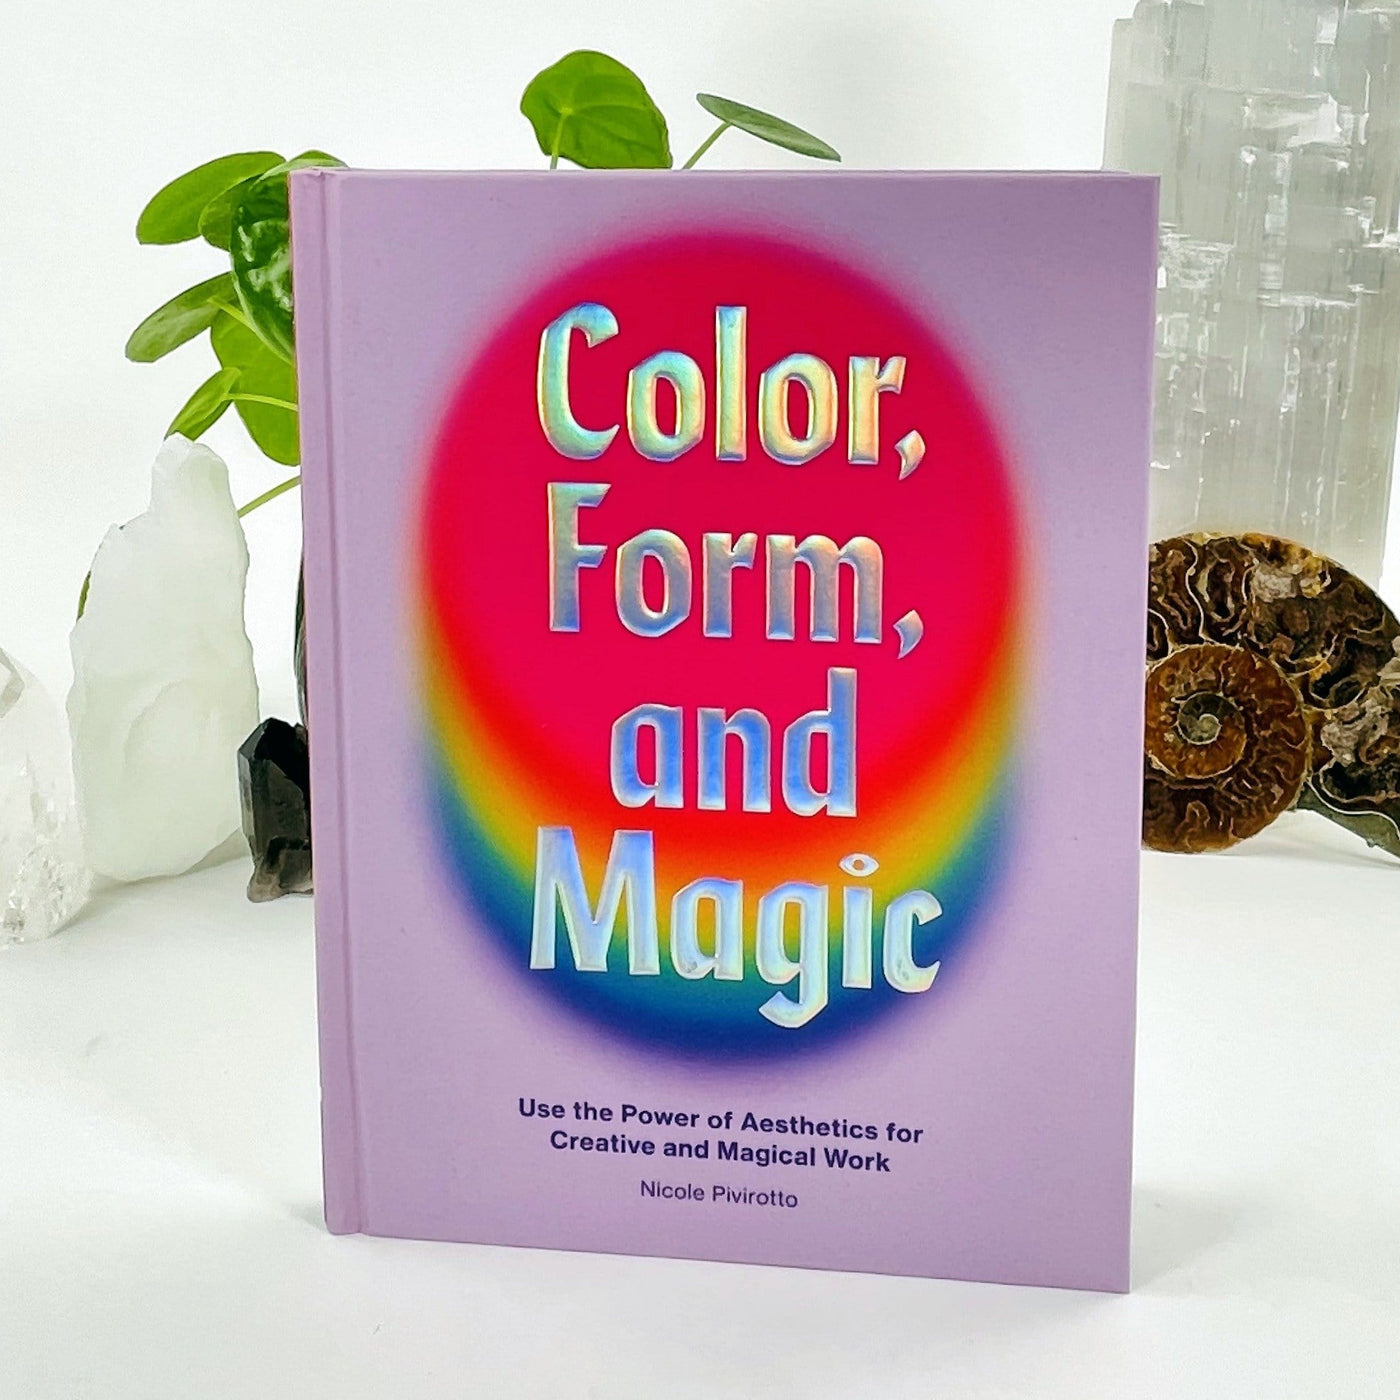 Color, Form and Magic book standing on a table